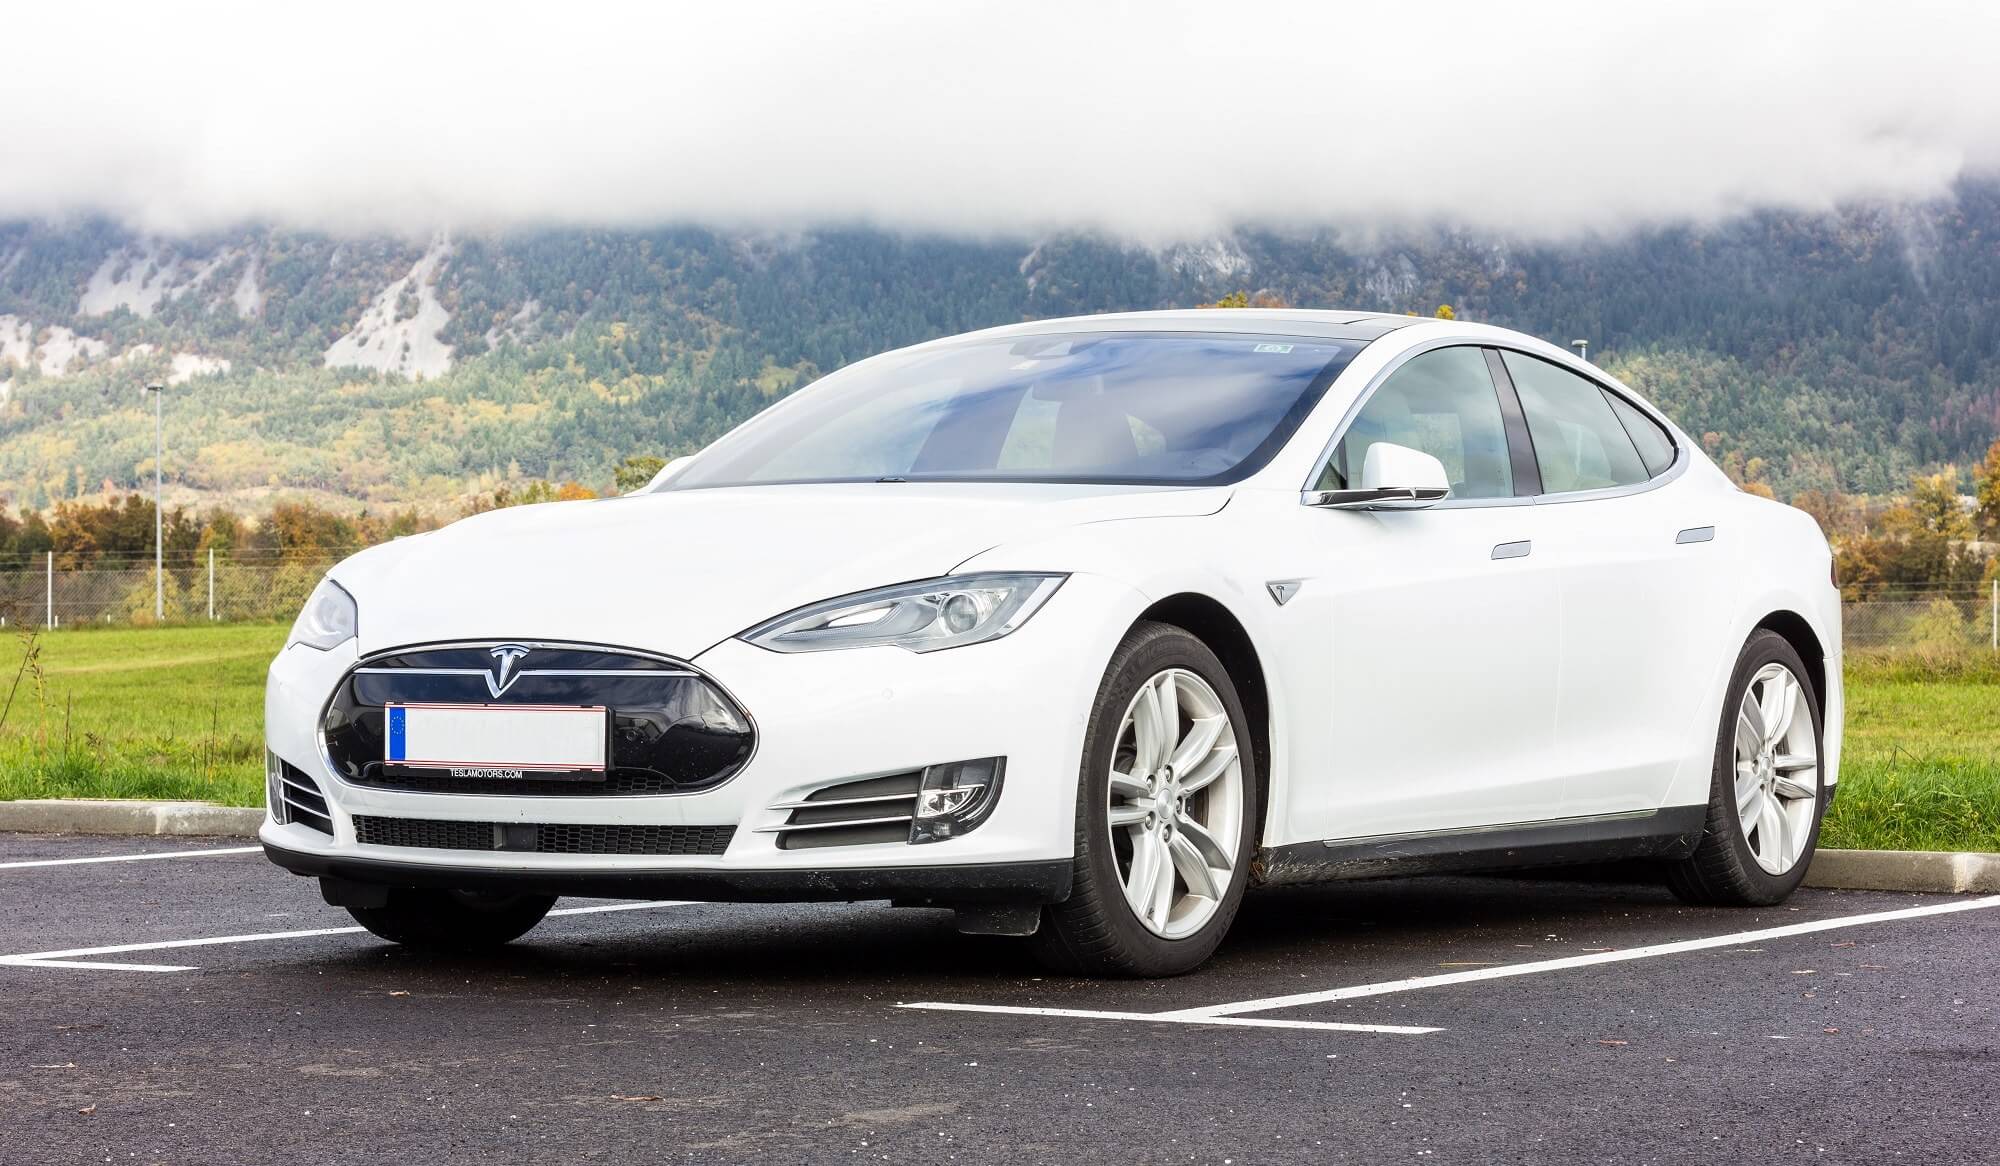 Researchers show how to trick a Tesla into speeding using a piece of tape